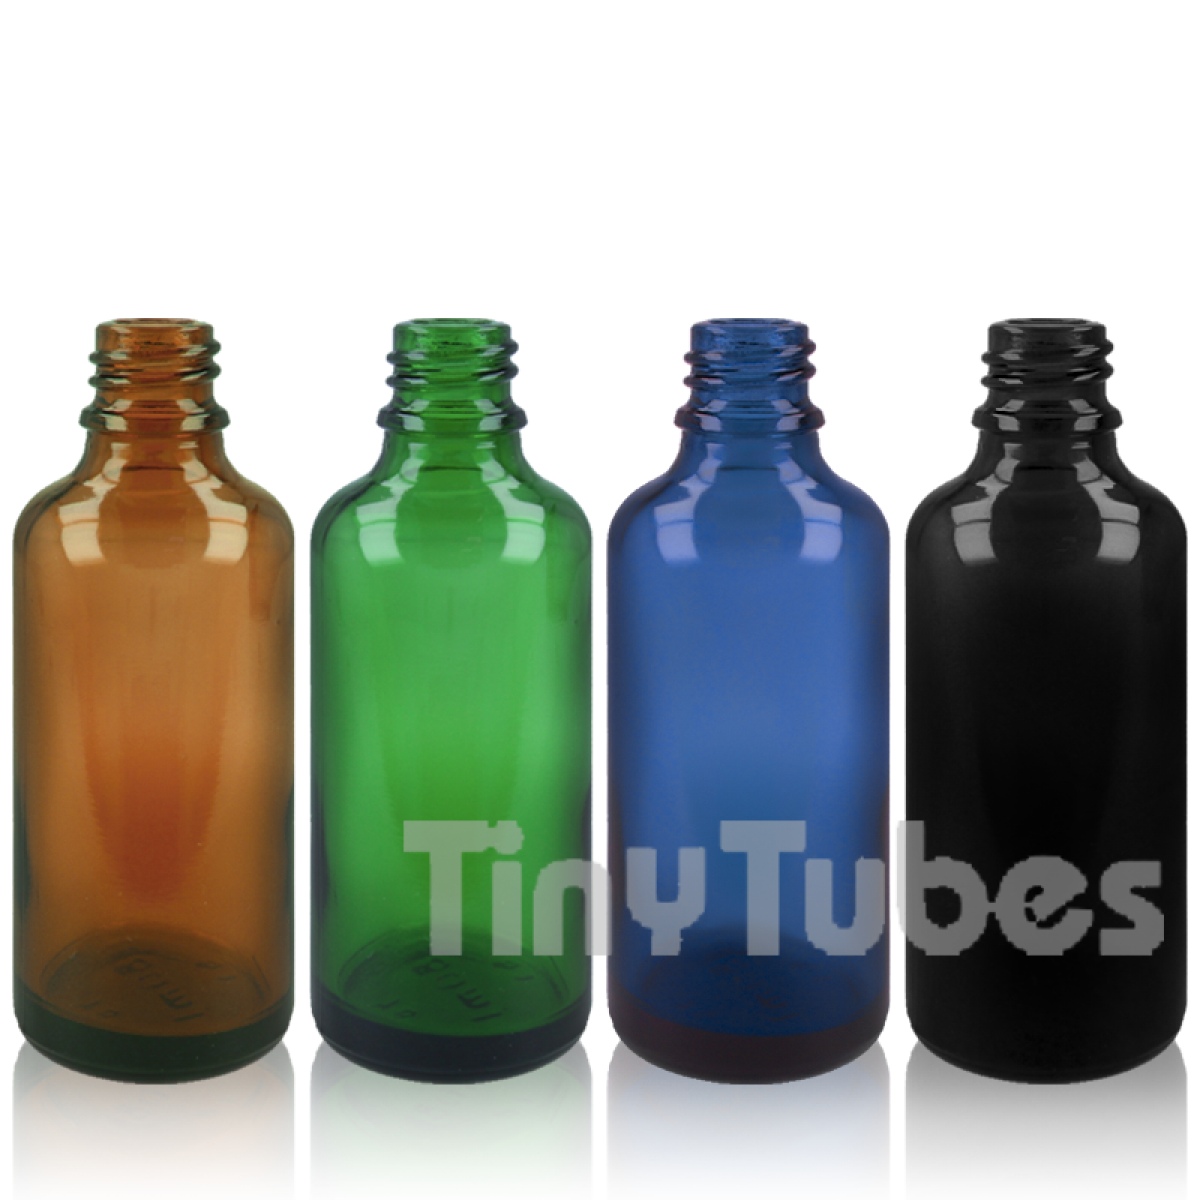 https://tiny-tubes.fr/image/cache/catalog/products/DROPPER100NEG_1-1200x1200.png